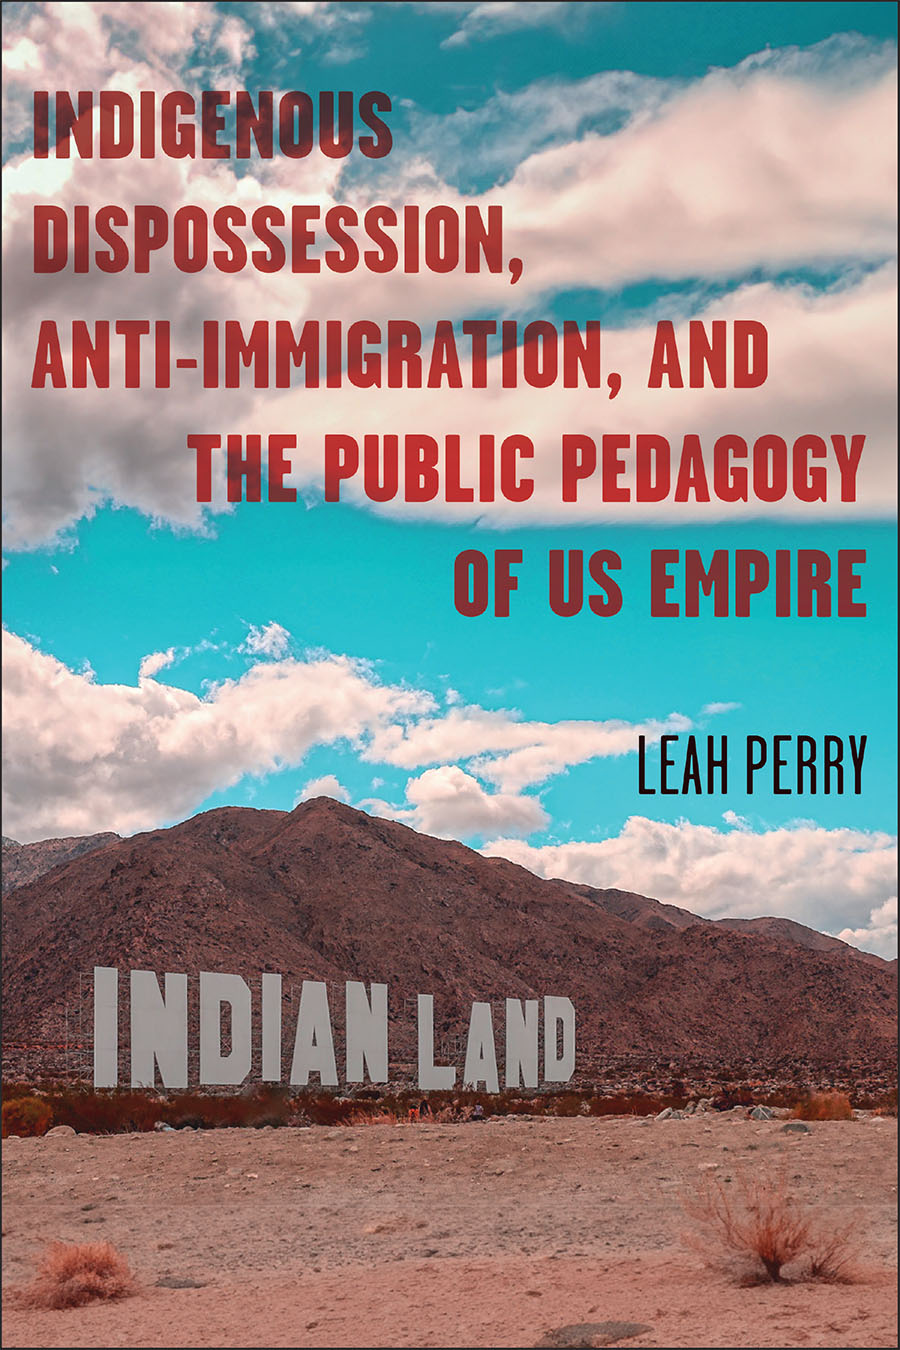 Front cover of Indigenous Dispossession, Anti-Immigration, and the Public Pedagogy of US Empire by Leah Perry, featuring a photo of a hilly desert landscape with a large sign that reads 'Indian Land'.